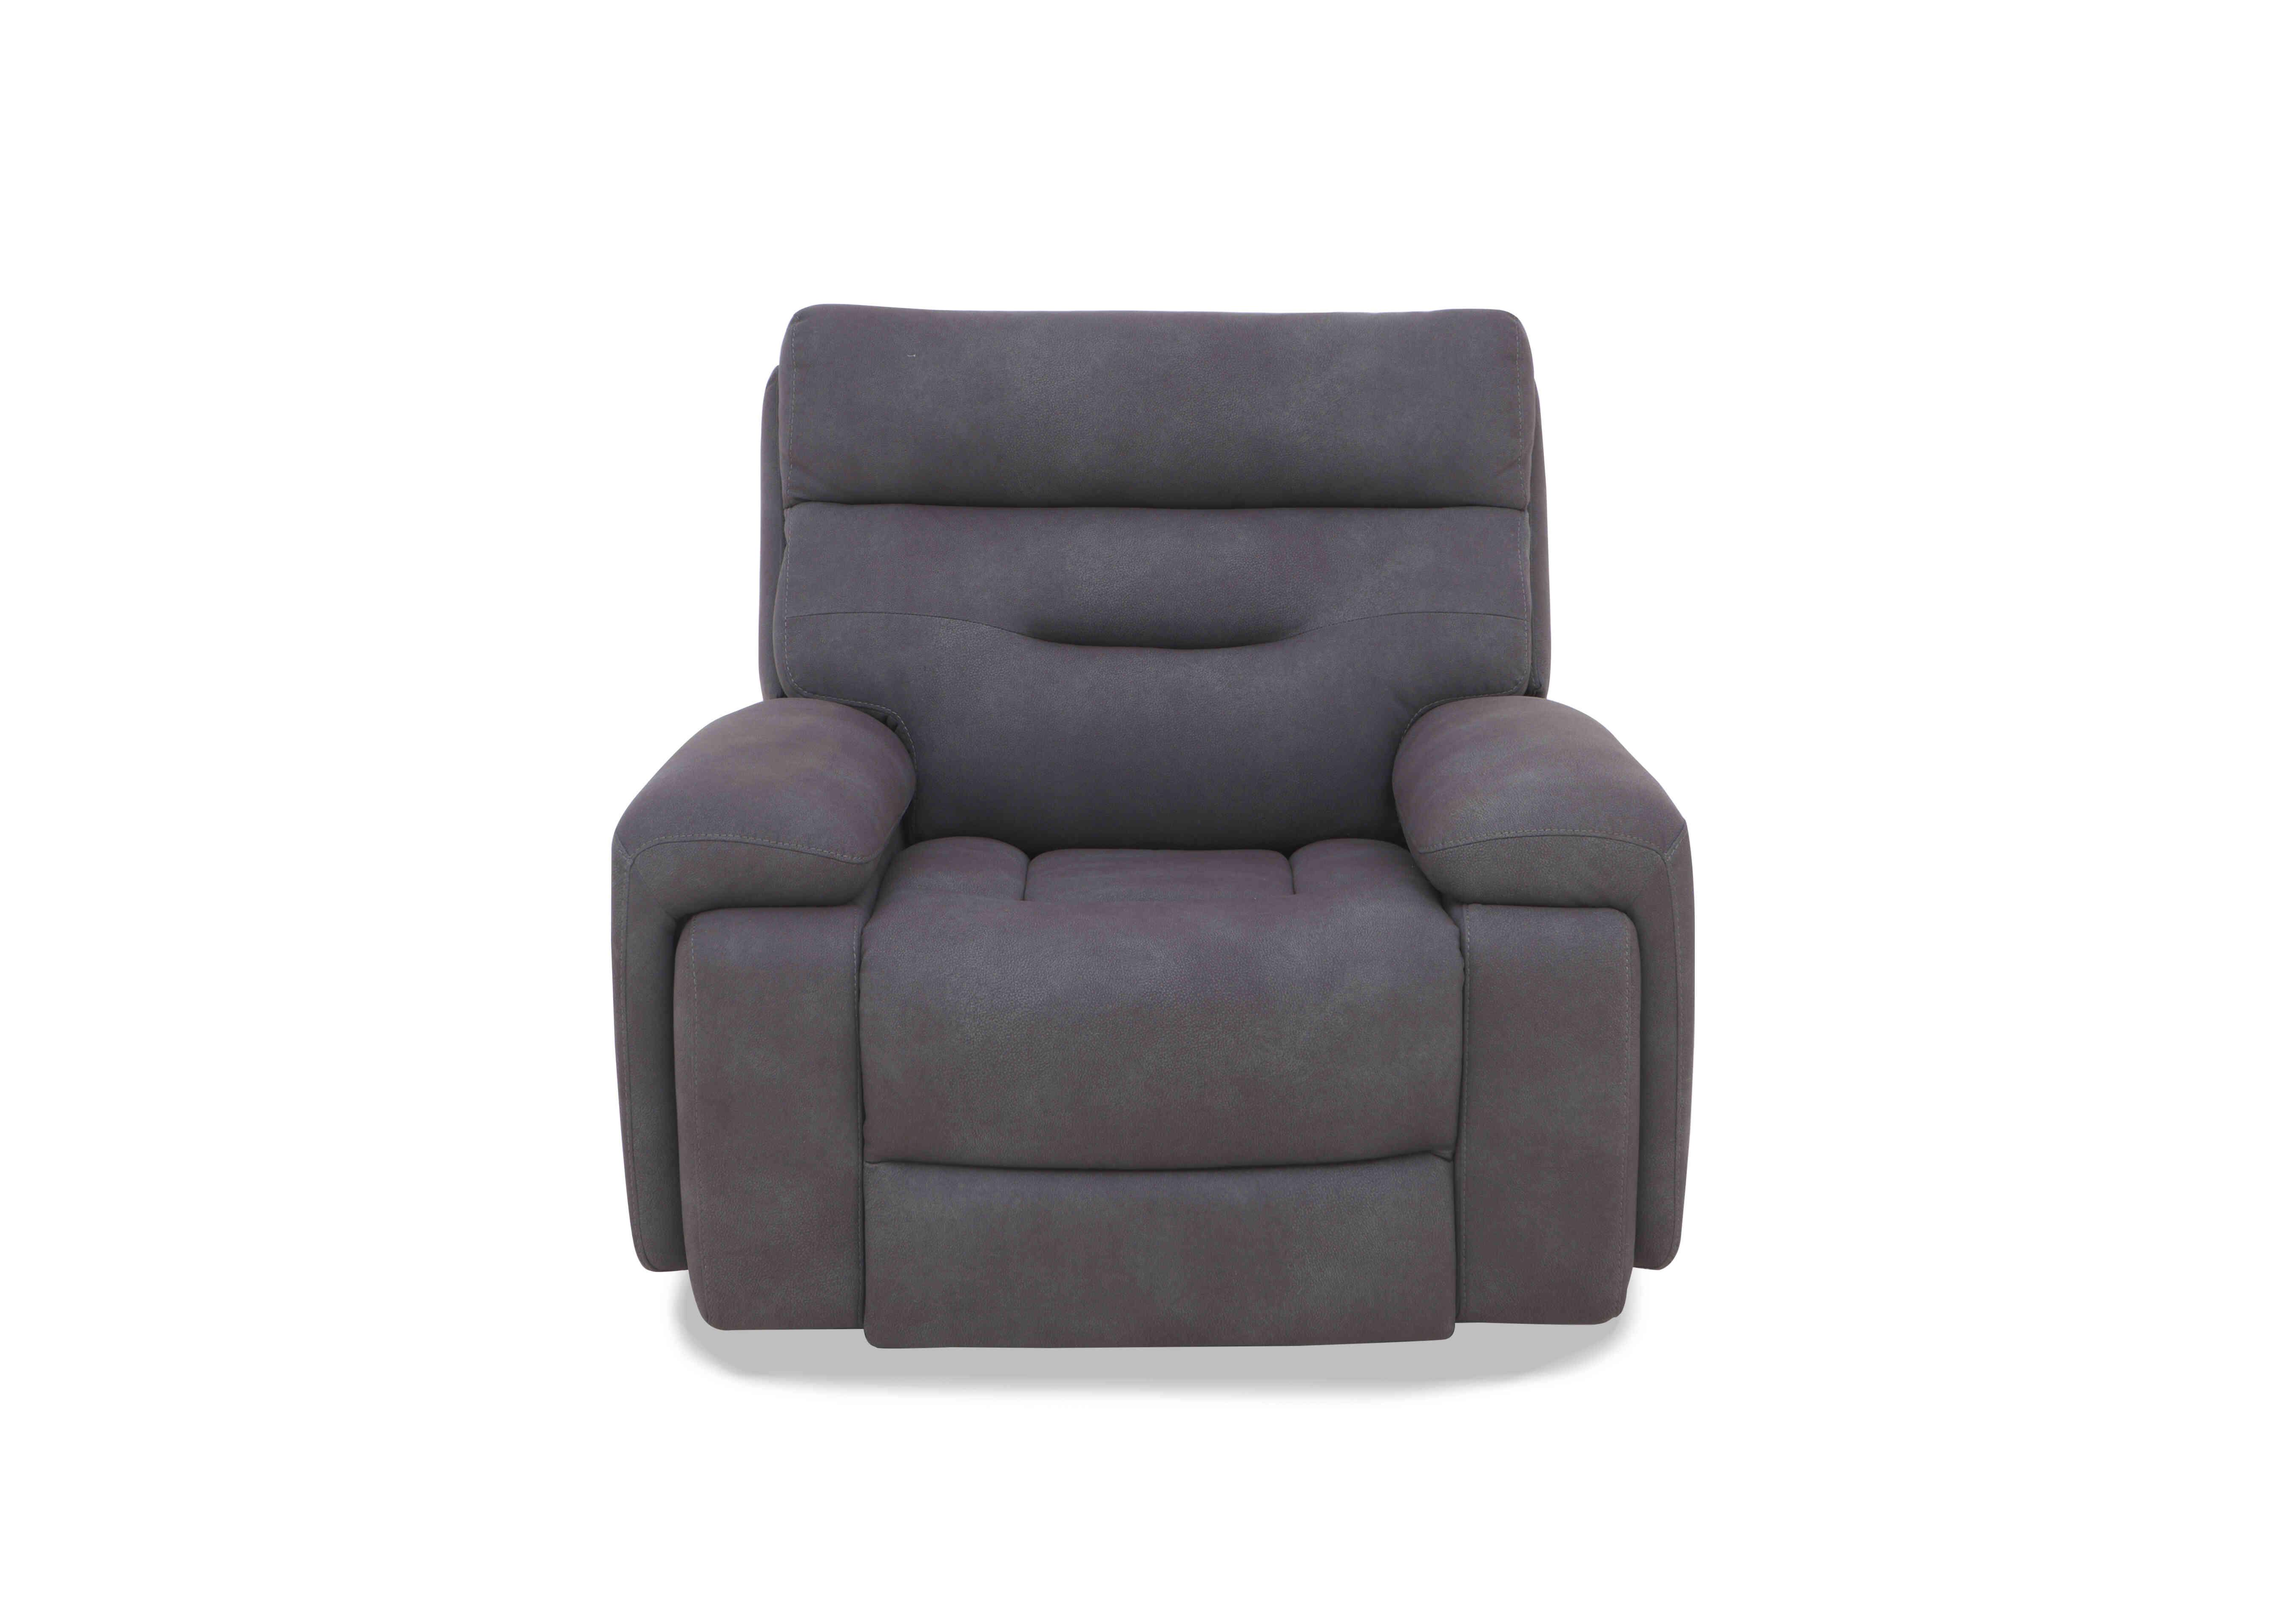 Cinemax Fabric Chair in Np-1107 Nappa Grey on Furniture Village